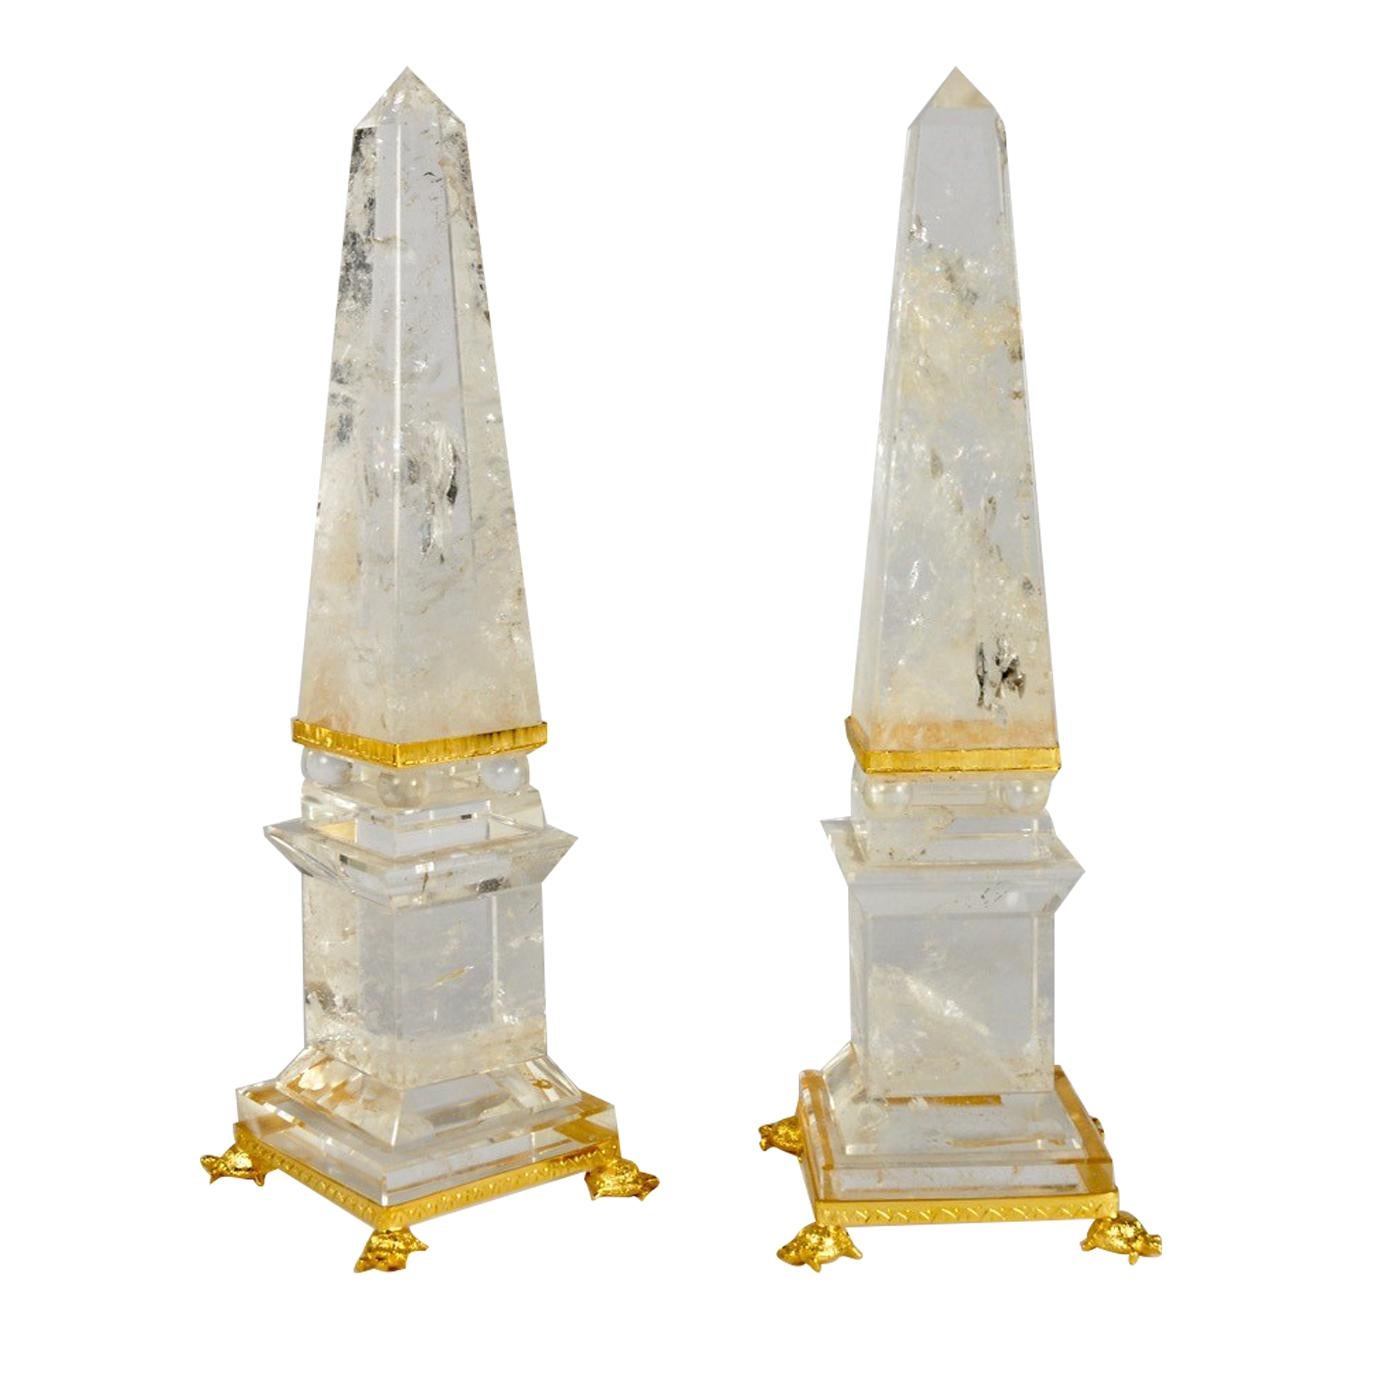 Making a lavish yet delicate statement wherever they are placed, these two decorative obelisks of prized crystal from Madagascar are entirely hand-worked to achieve their incredibly smooth surface. Their tapering silhouette rises from a footed